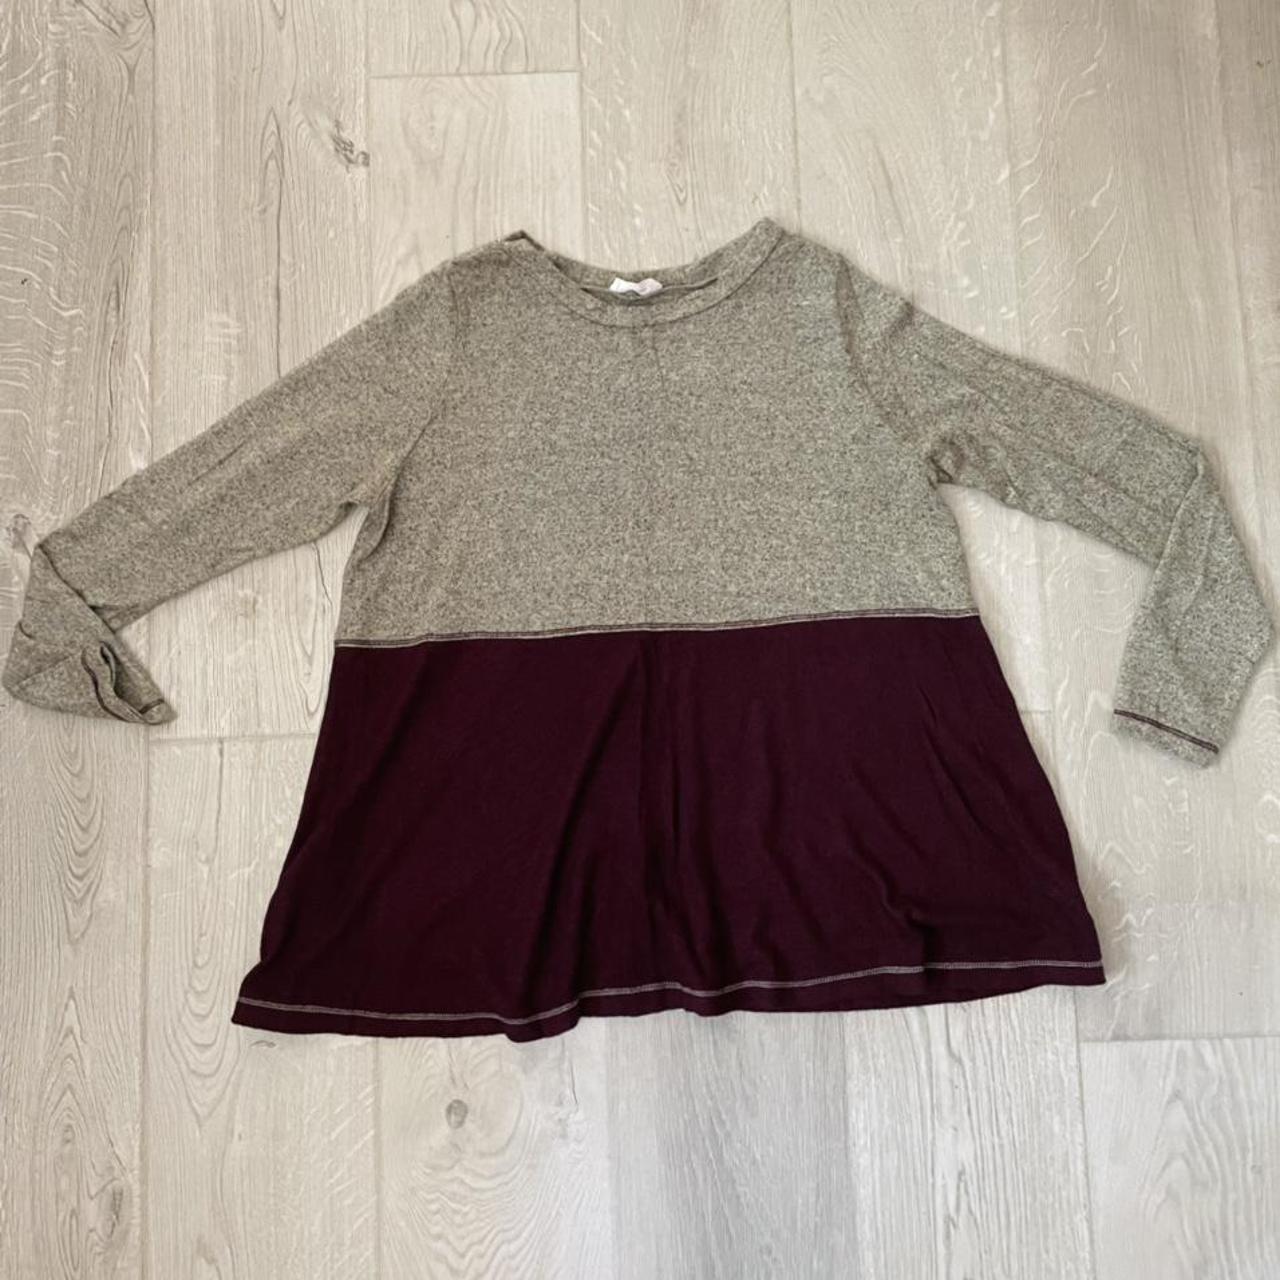 Product Image 1 - EE:SOME TOP

#boutique #cozy #comfy #fall